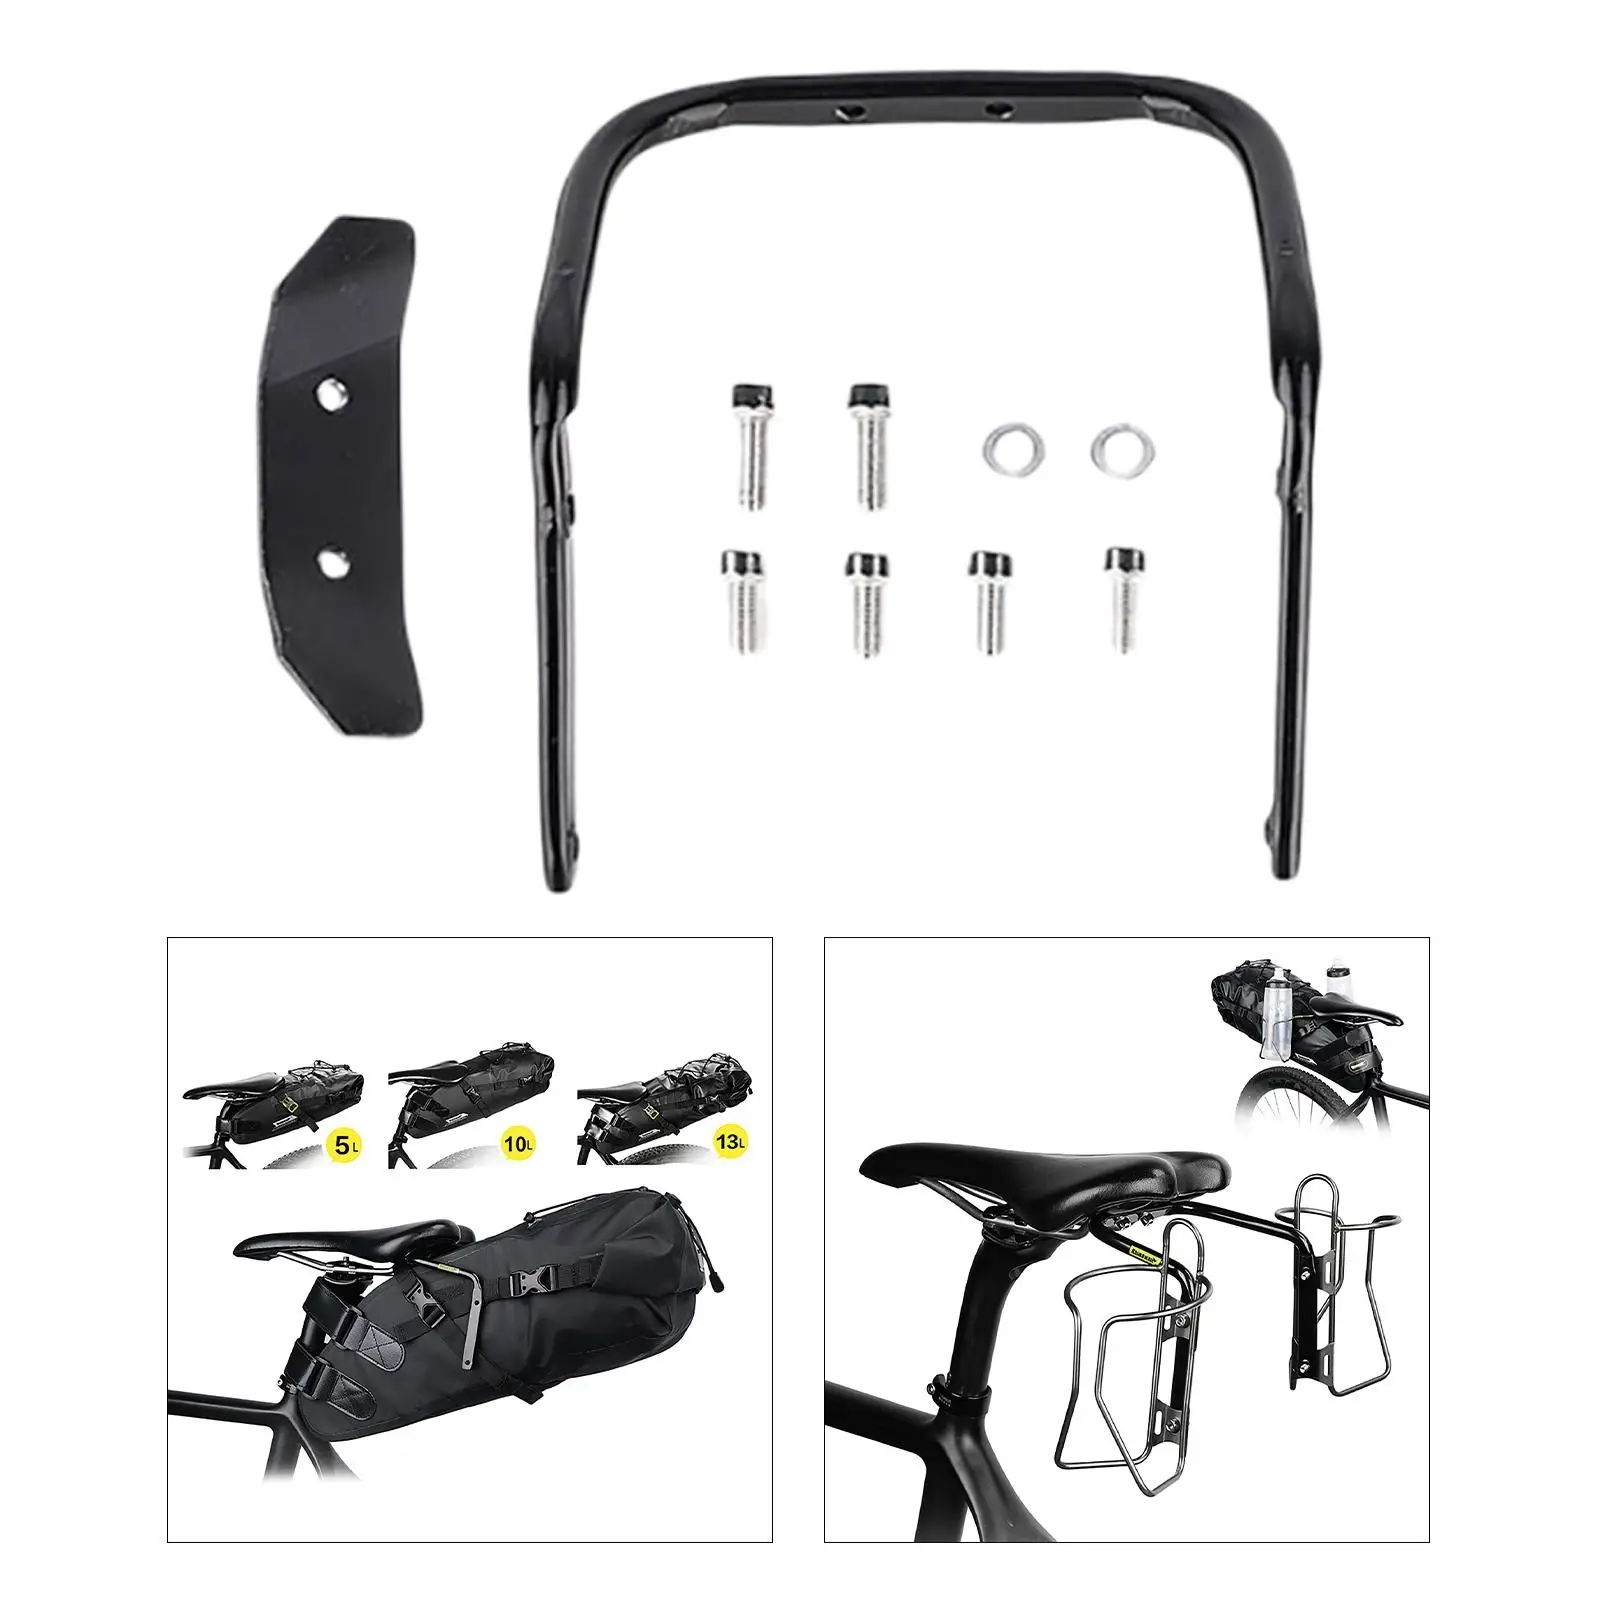 Bicycle Tail Bag Stabilizer Aluminum Alloy Cycling Riding Anti-Shake Bike Accessories Saddle Bag Stabilizer Mount for Bike